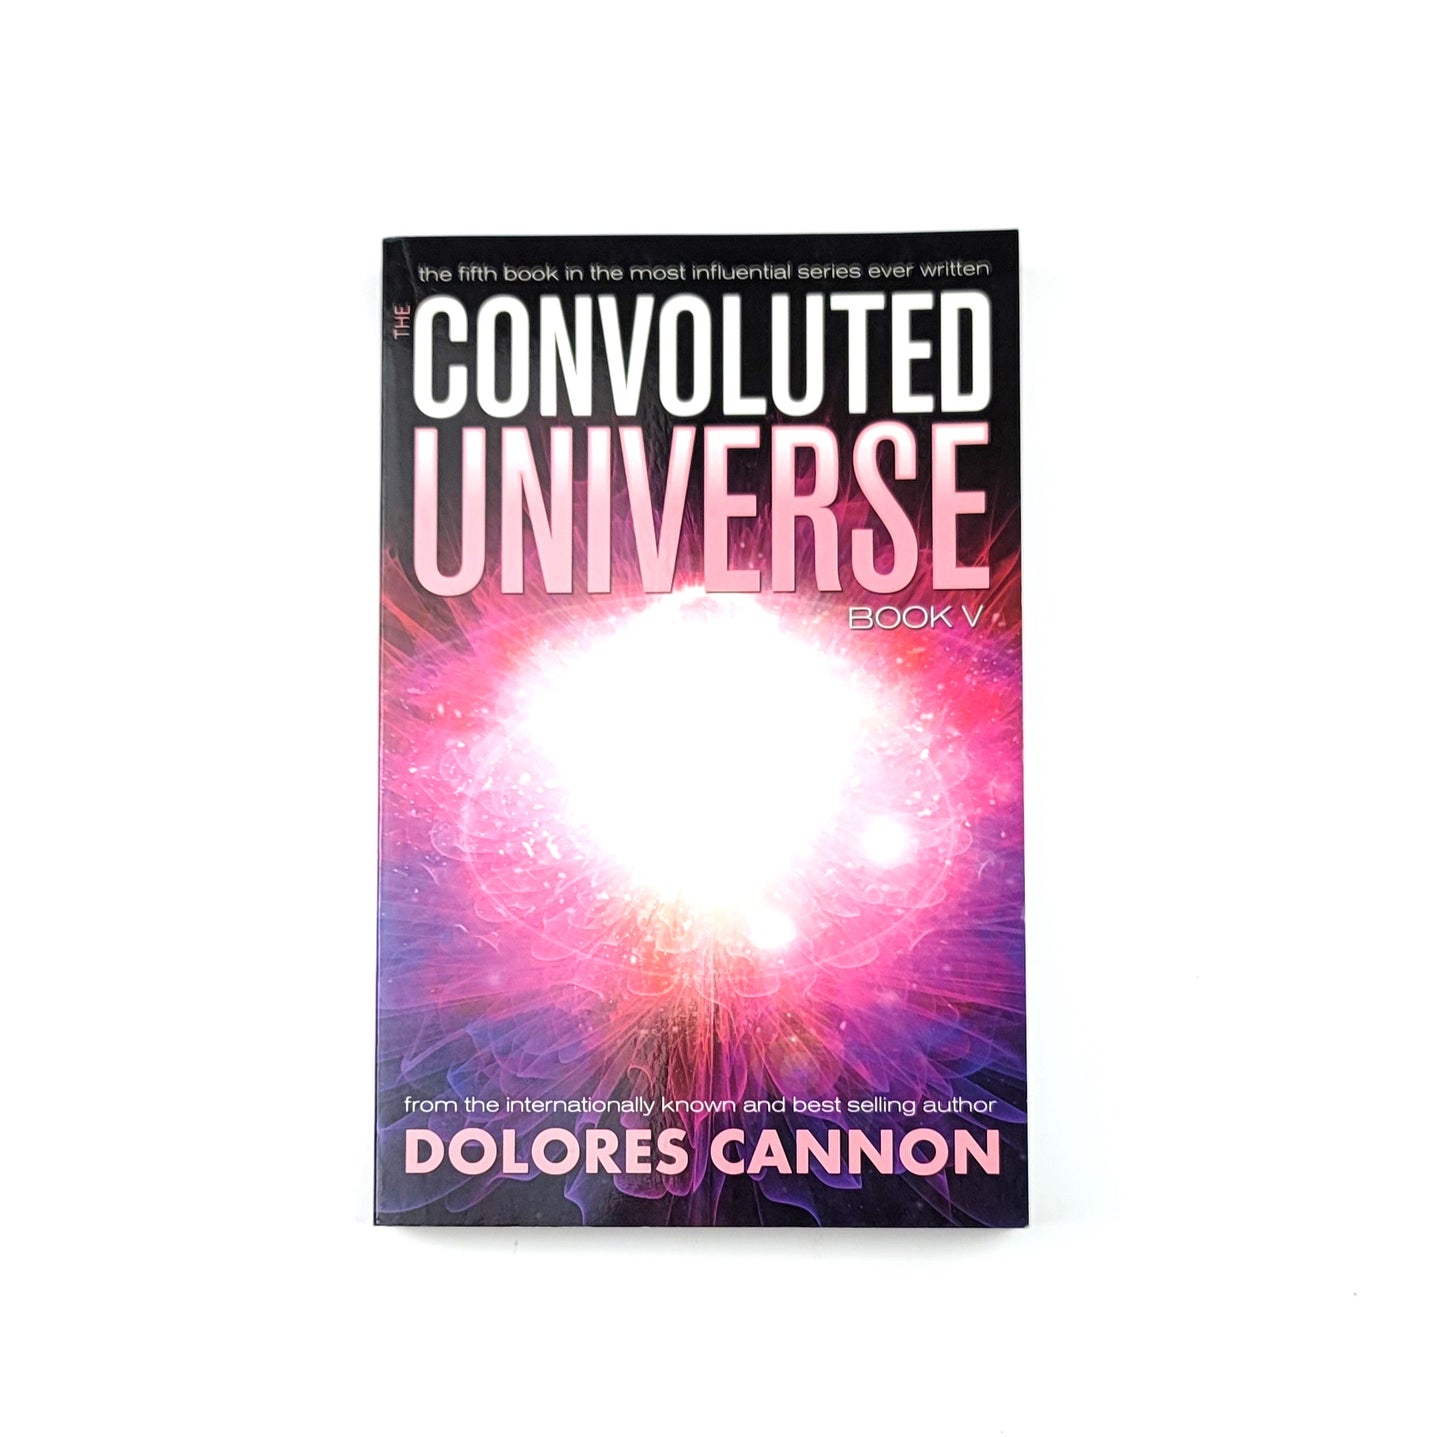 The Convoluted Universe: Book Five (The Convoluted Universe series) by Dolores Cannon